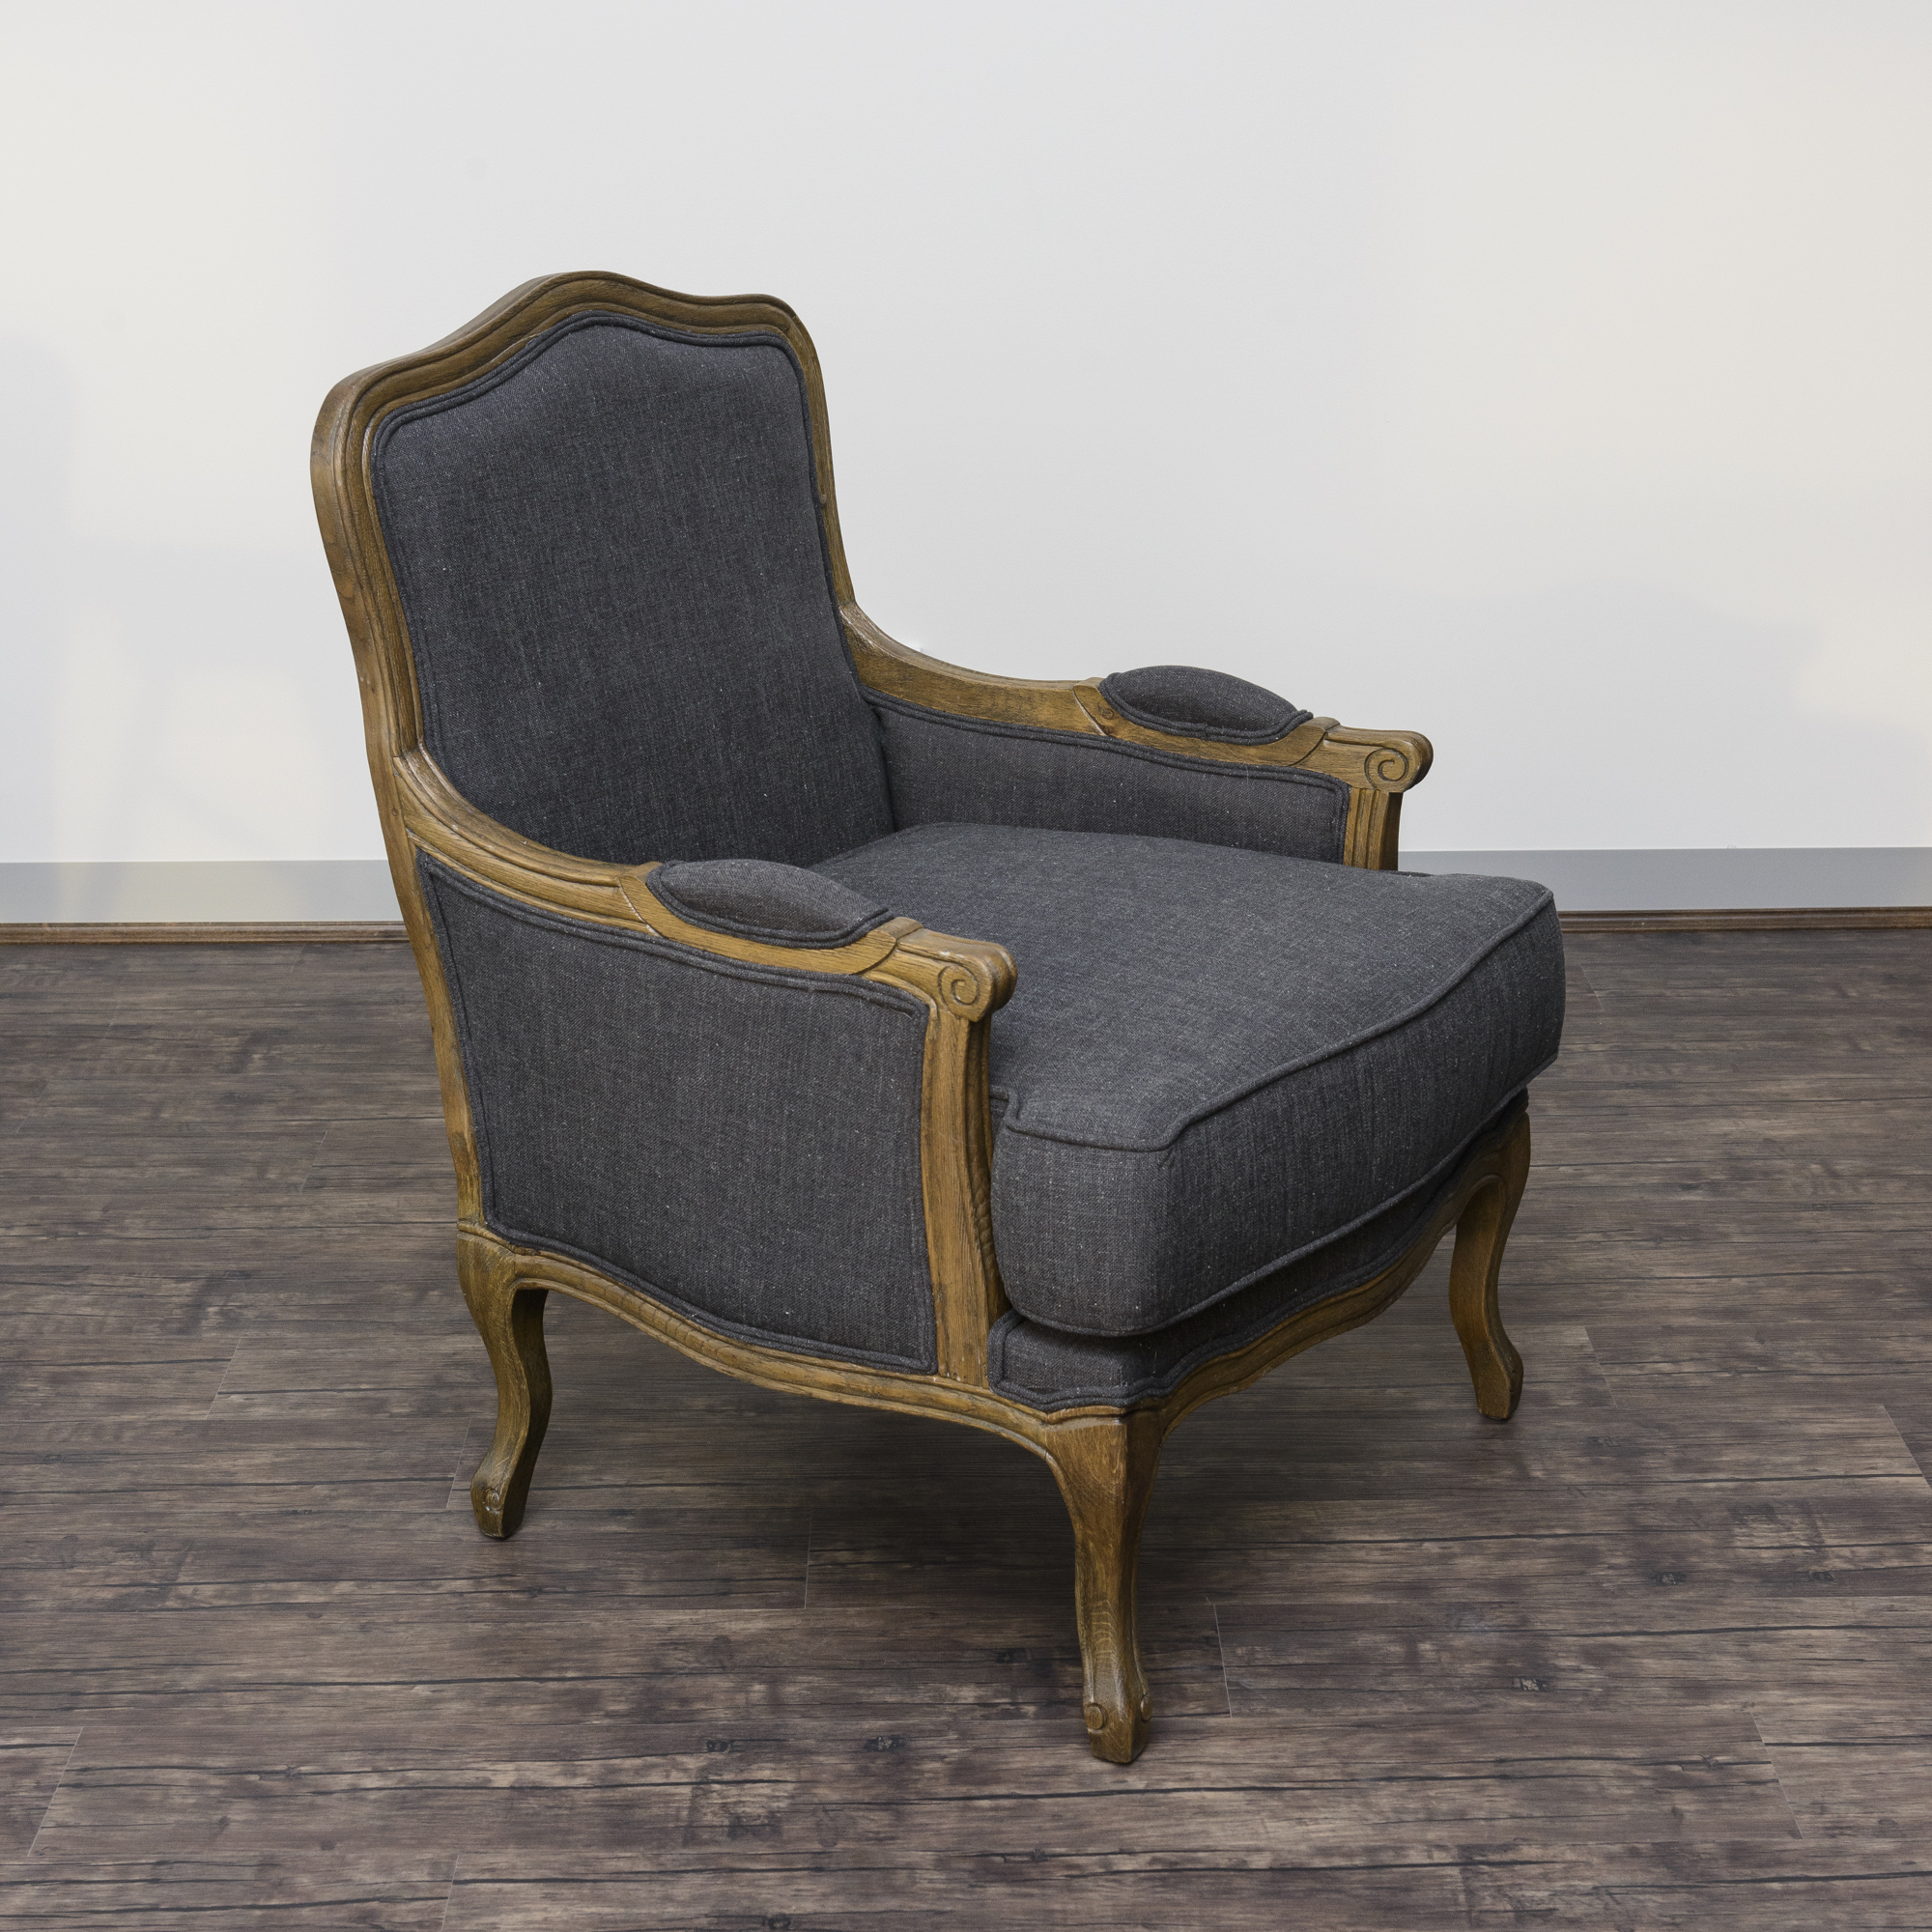 Accent chair “Ludwig” in Dark Grey Linen-Blend Fabric